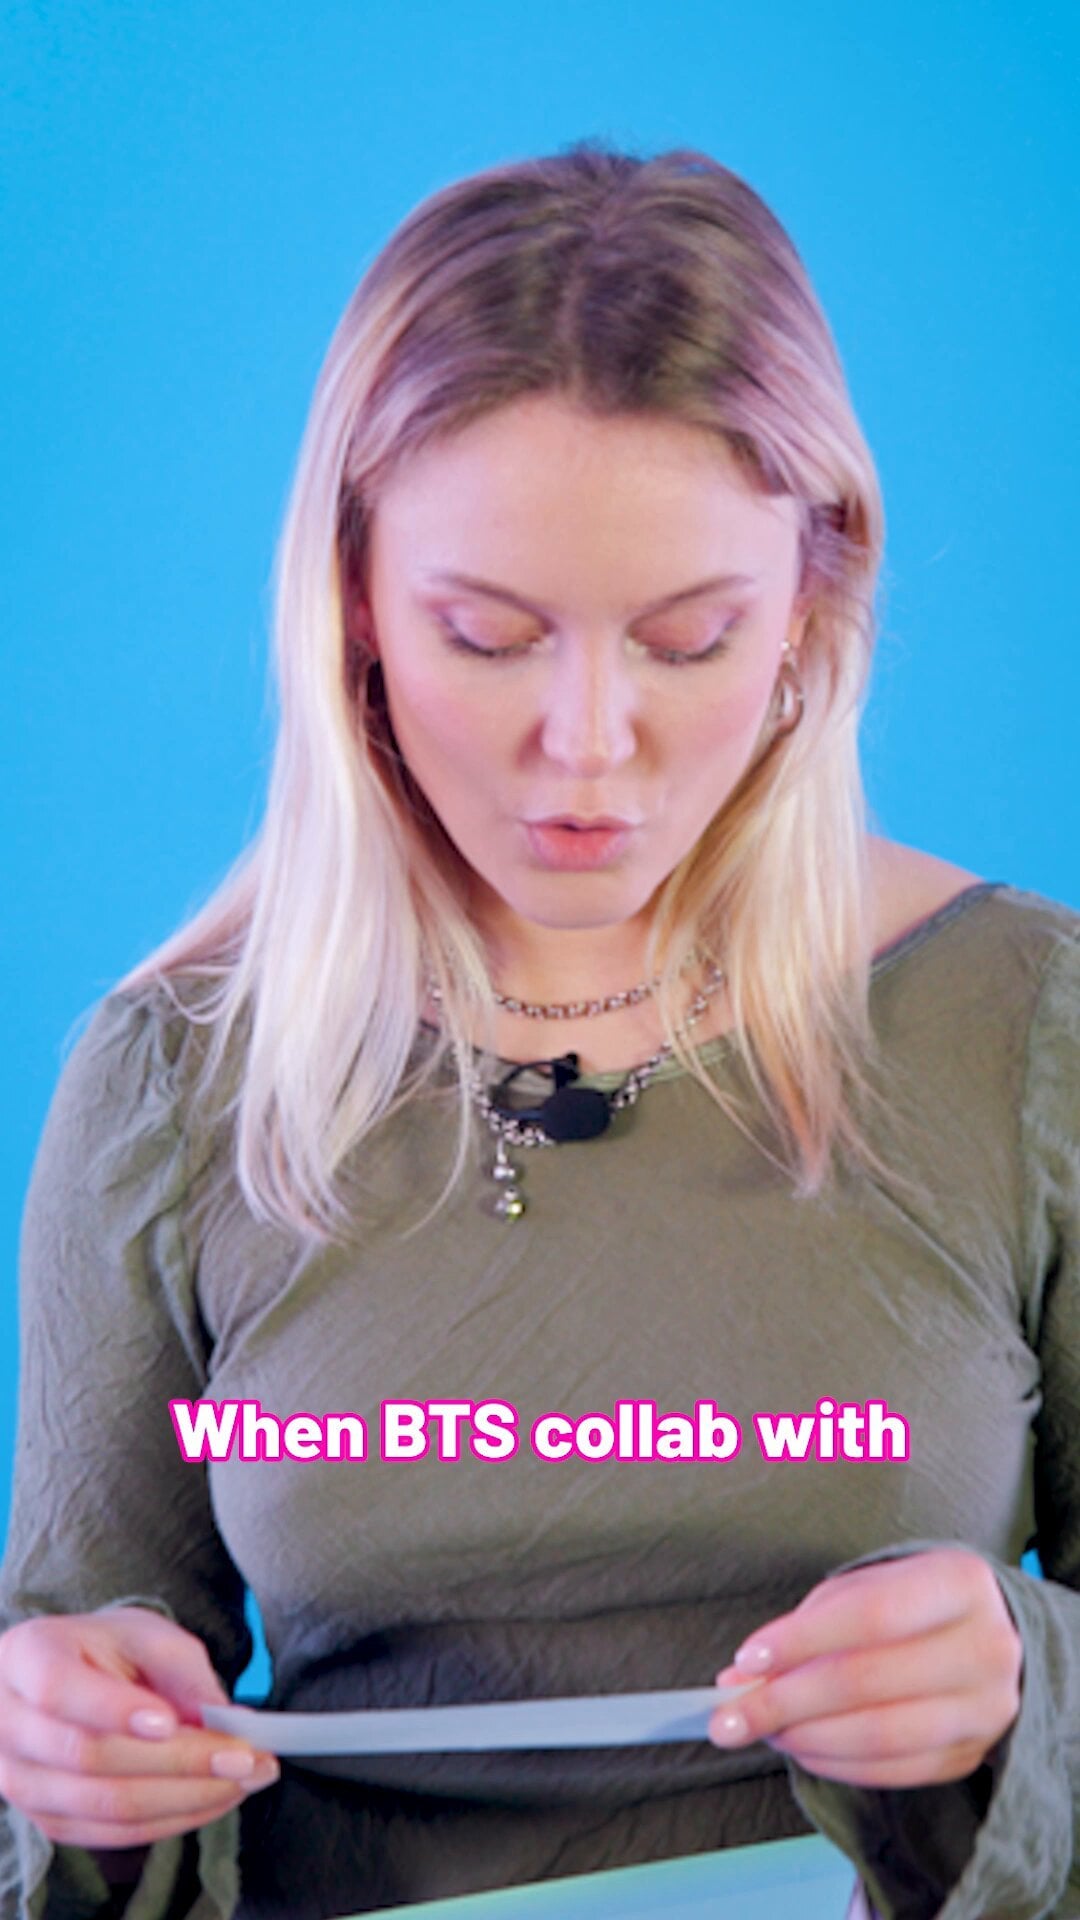 231014 Zara Larsson mentions that "A Brand New Day" with BTS is one of her favourite collabs, in a Hits Radio UK interview